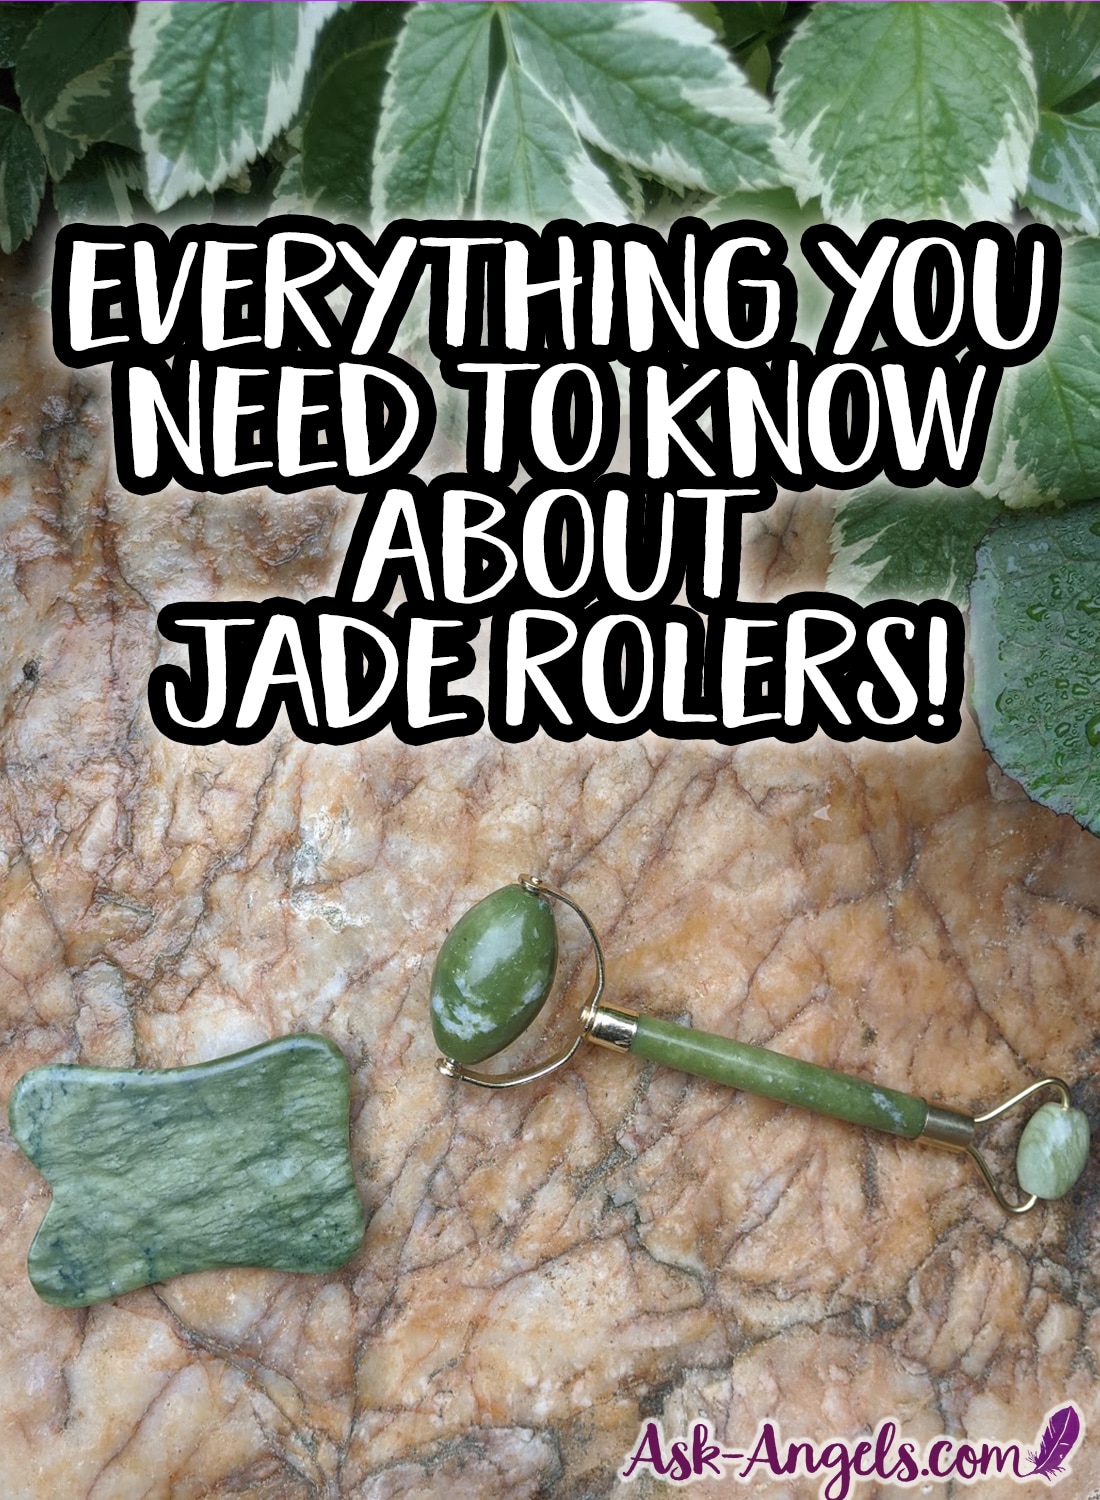 Everything you need to know about real jade rollers.